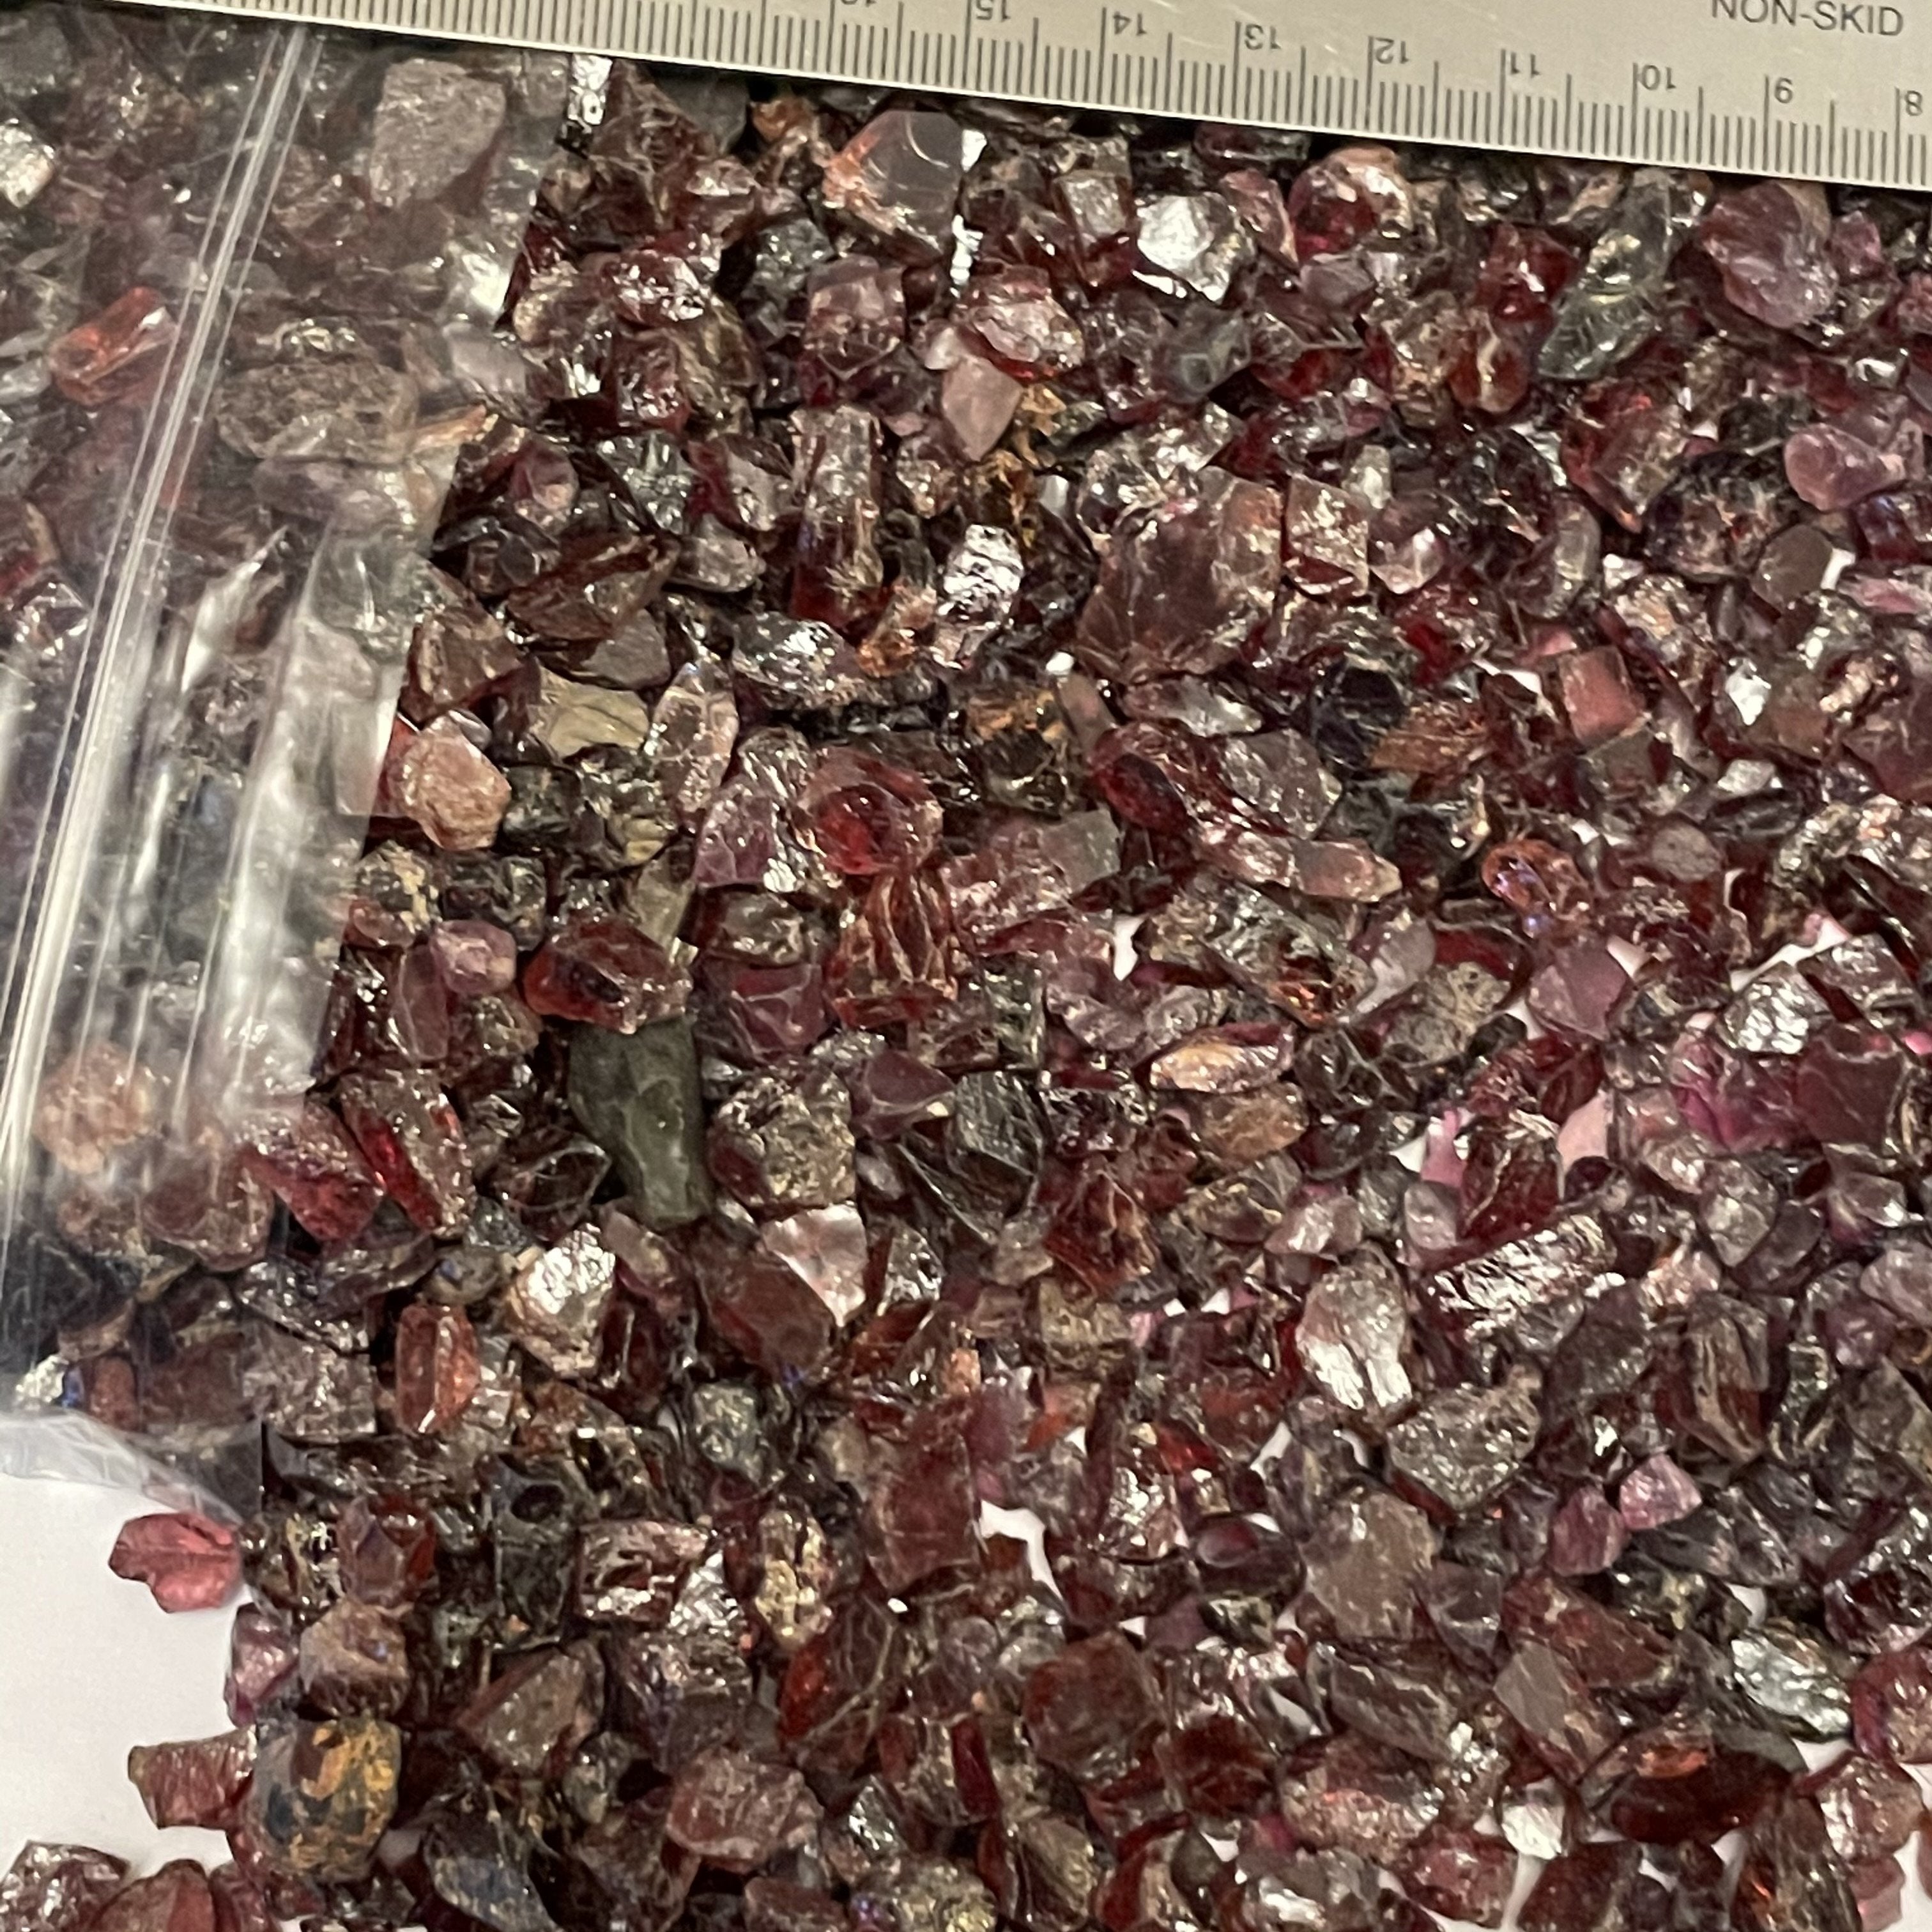 Garnets Tanzania Price Is For 1 Piece 0.5Gm - 1.8Gm Clarity Clean Vvs Vs Slightly Included Eye To